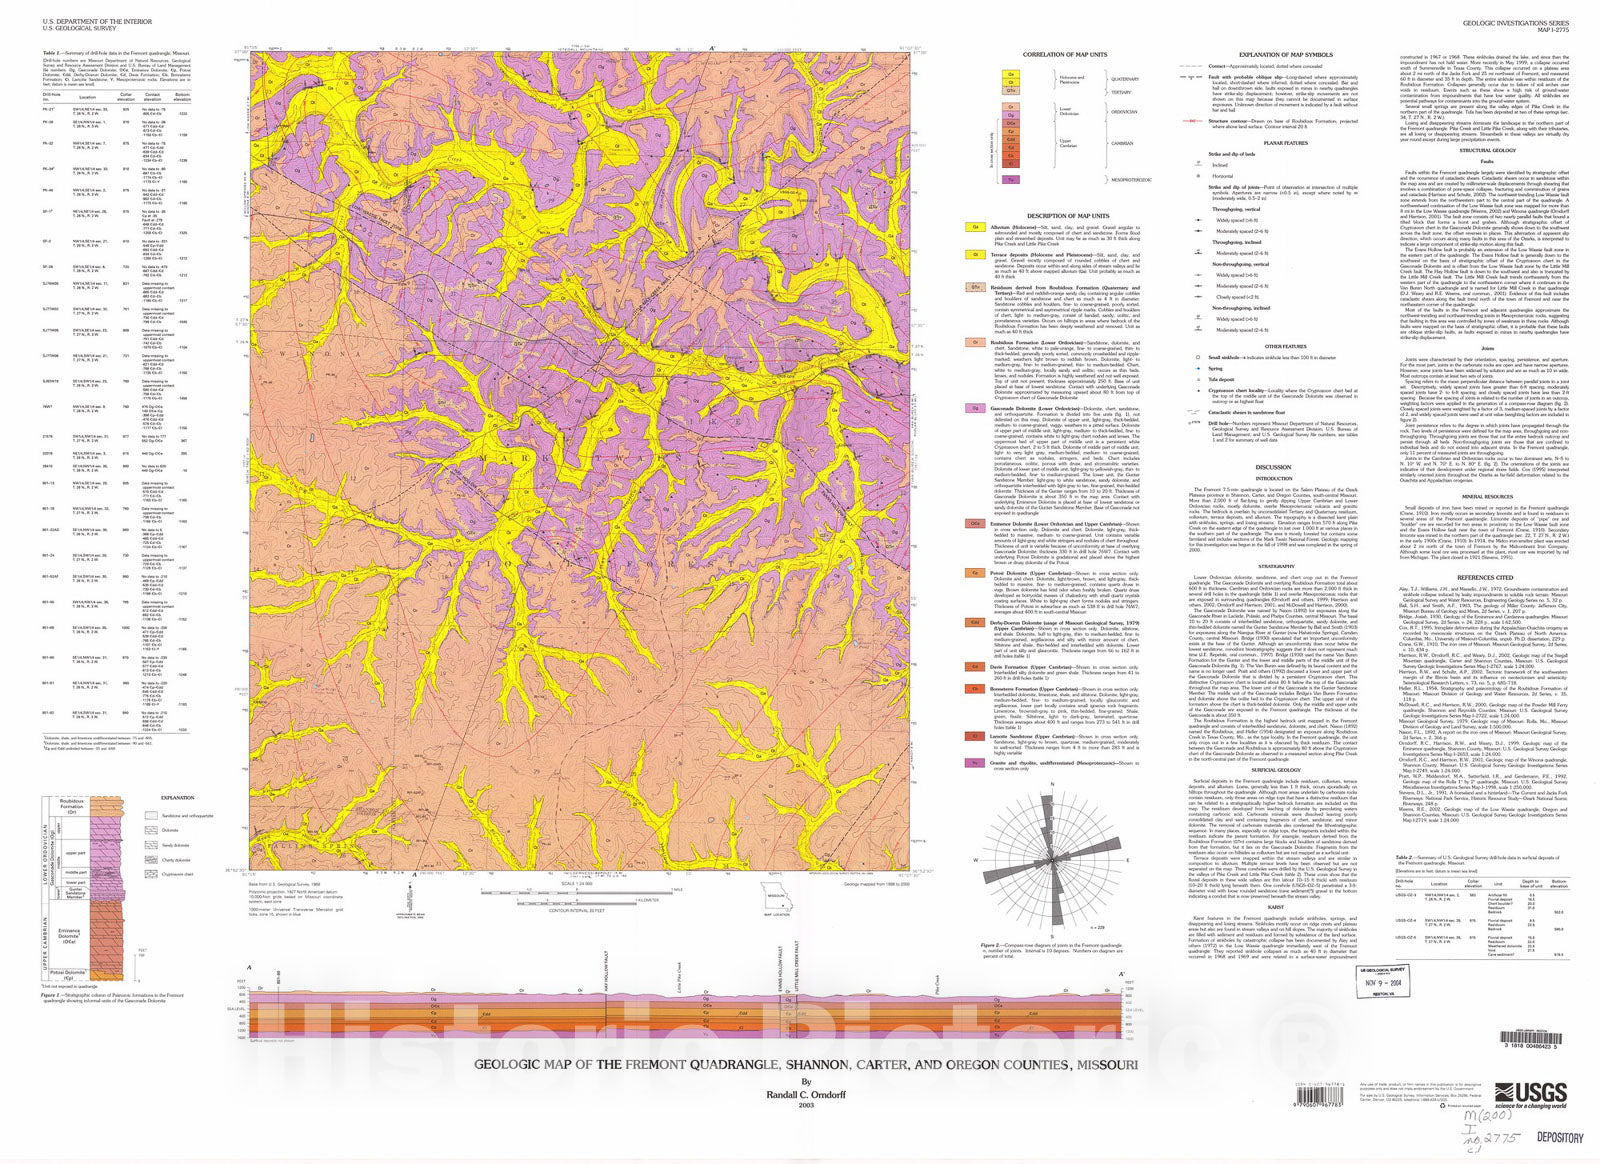 Map : Geologic map of the Fremont quadrangle, Shannon, Carter, and Oregon Counties, Missouri, 2003 Cartography Wall Art :